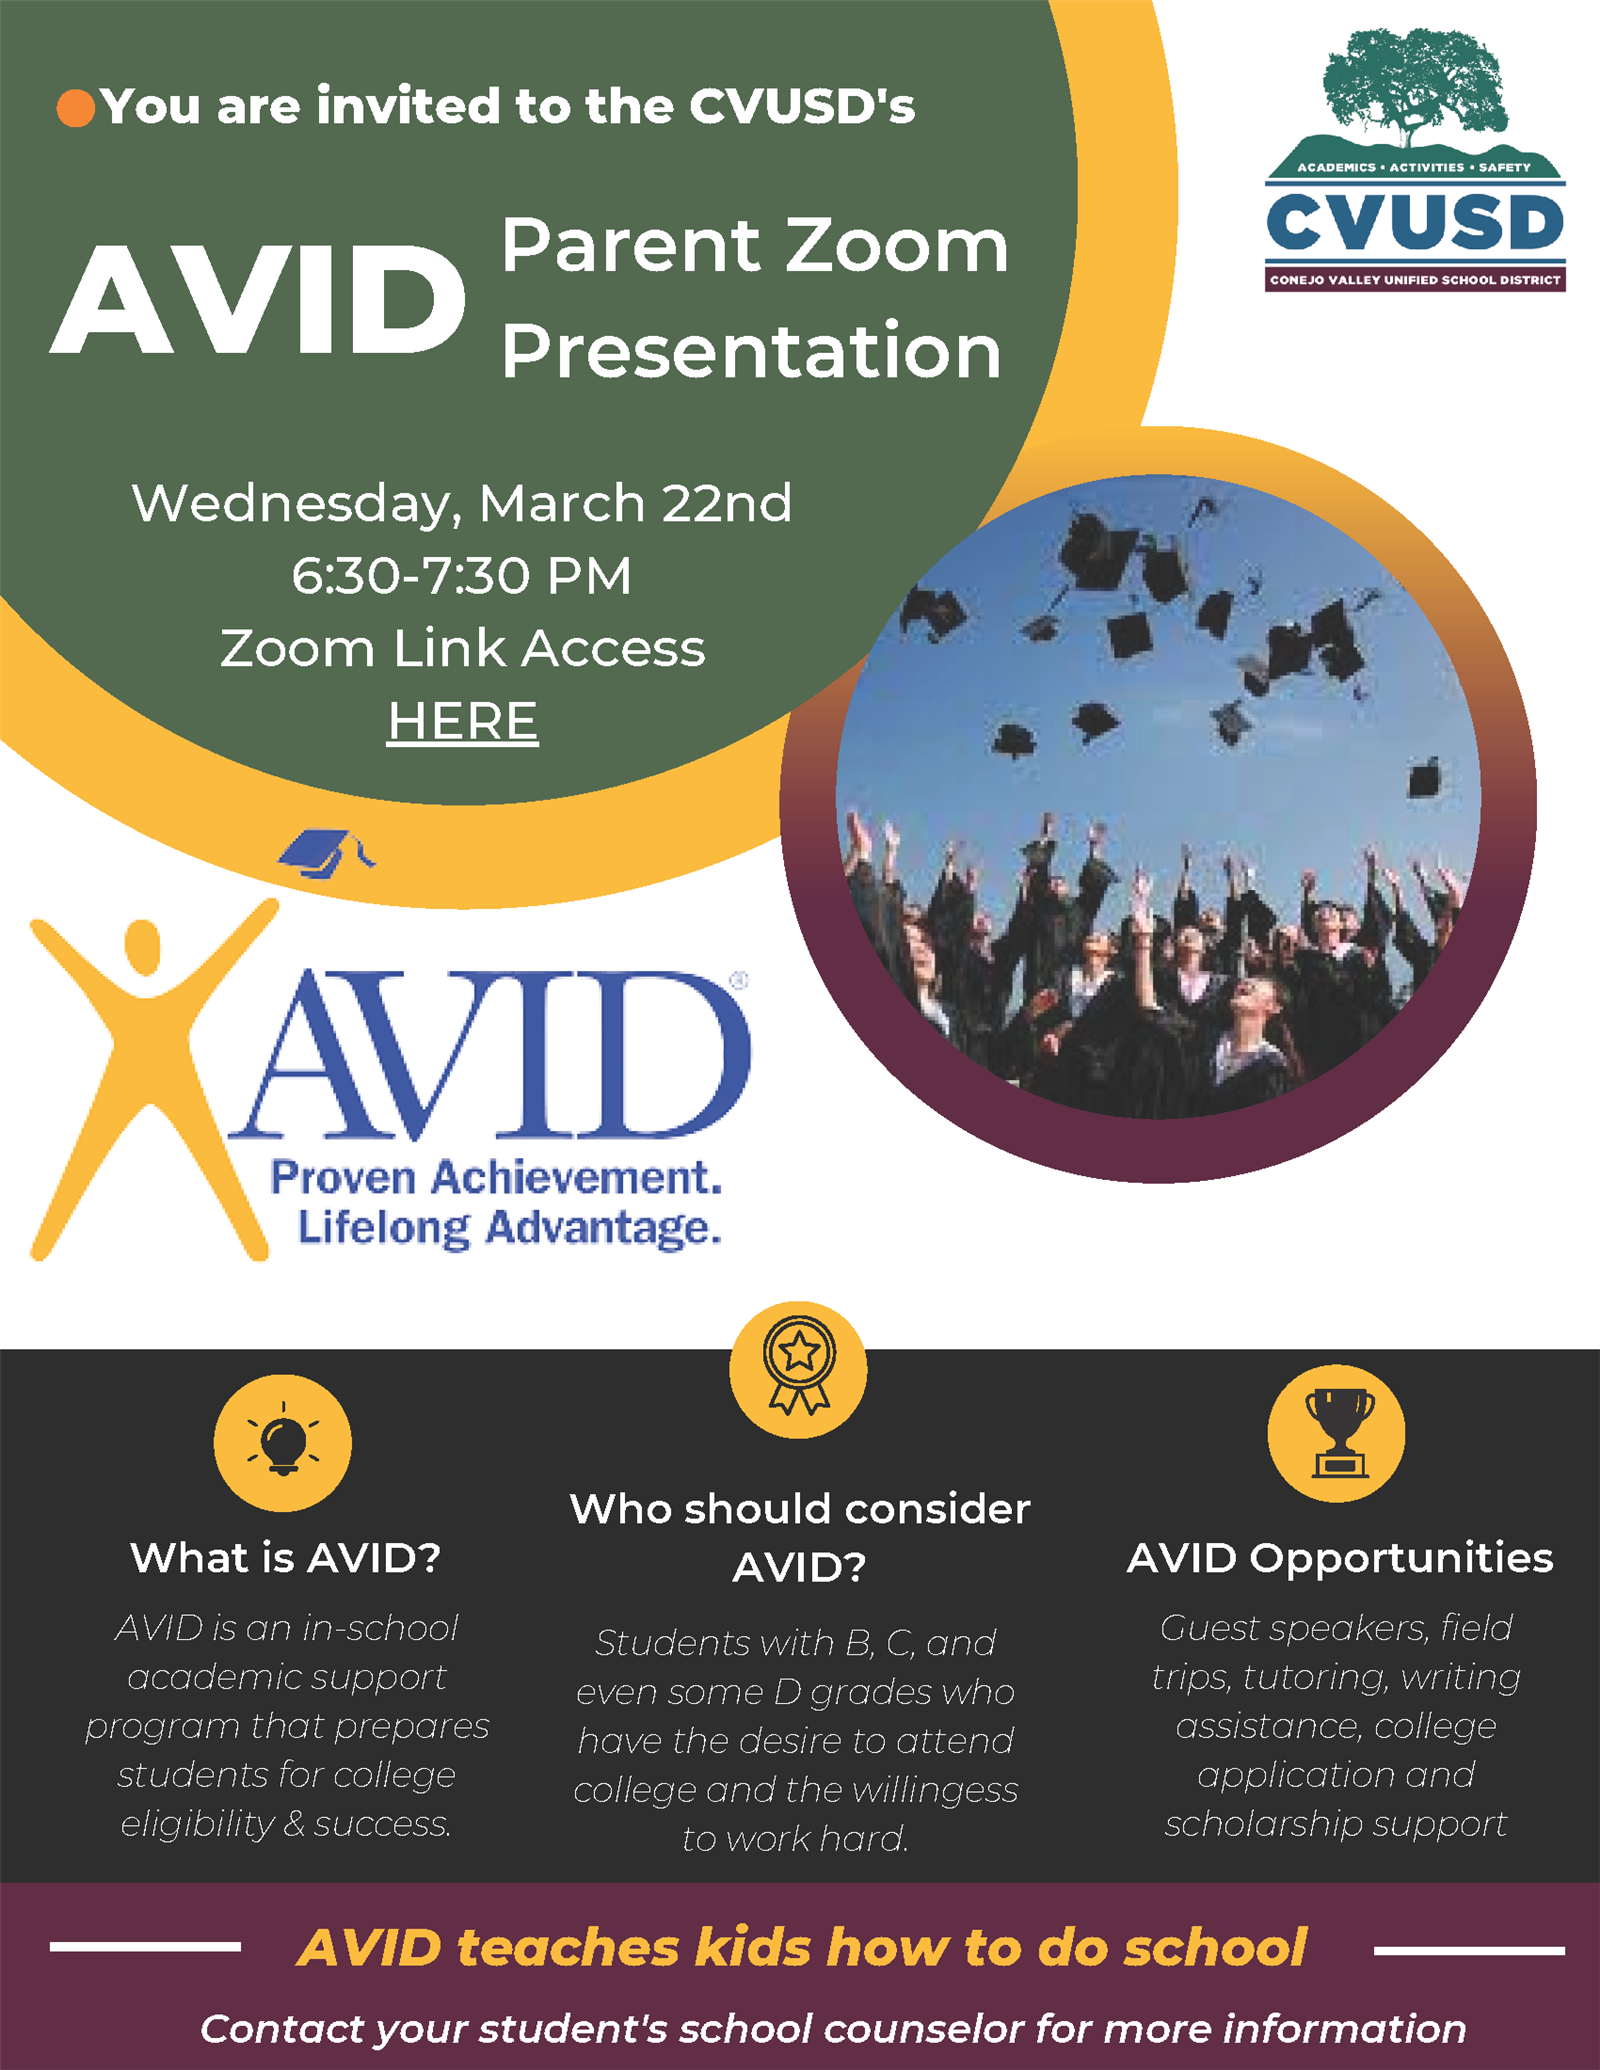  Learn more about the AVID Program at the upcoming Information Night